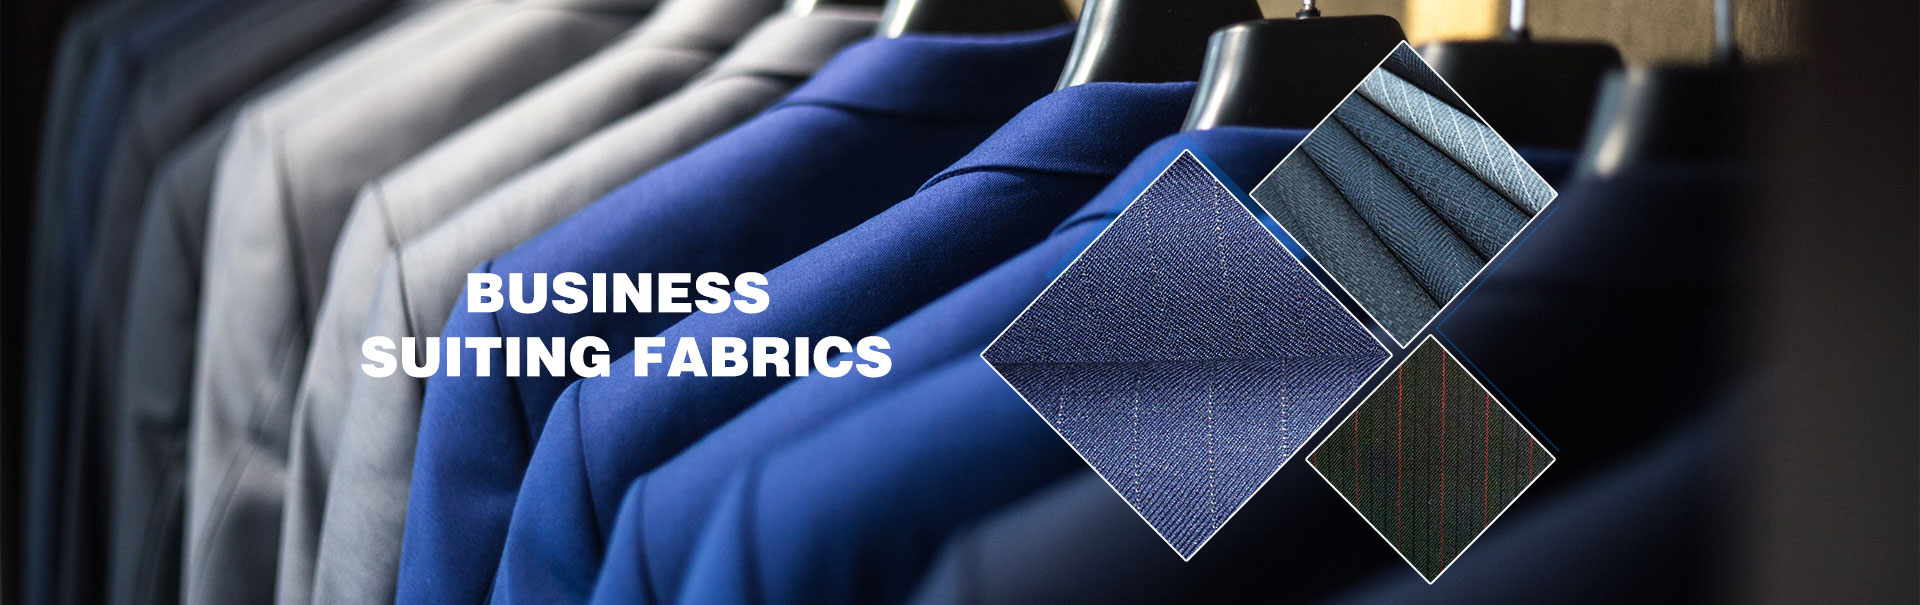 Business Suiting Fabrics Chinese Supplier